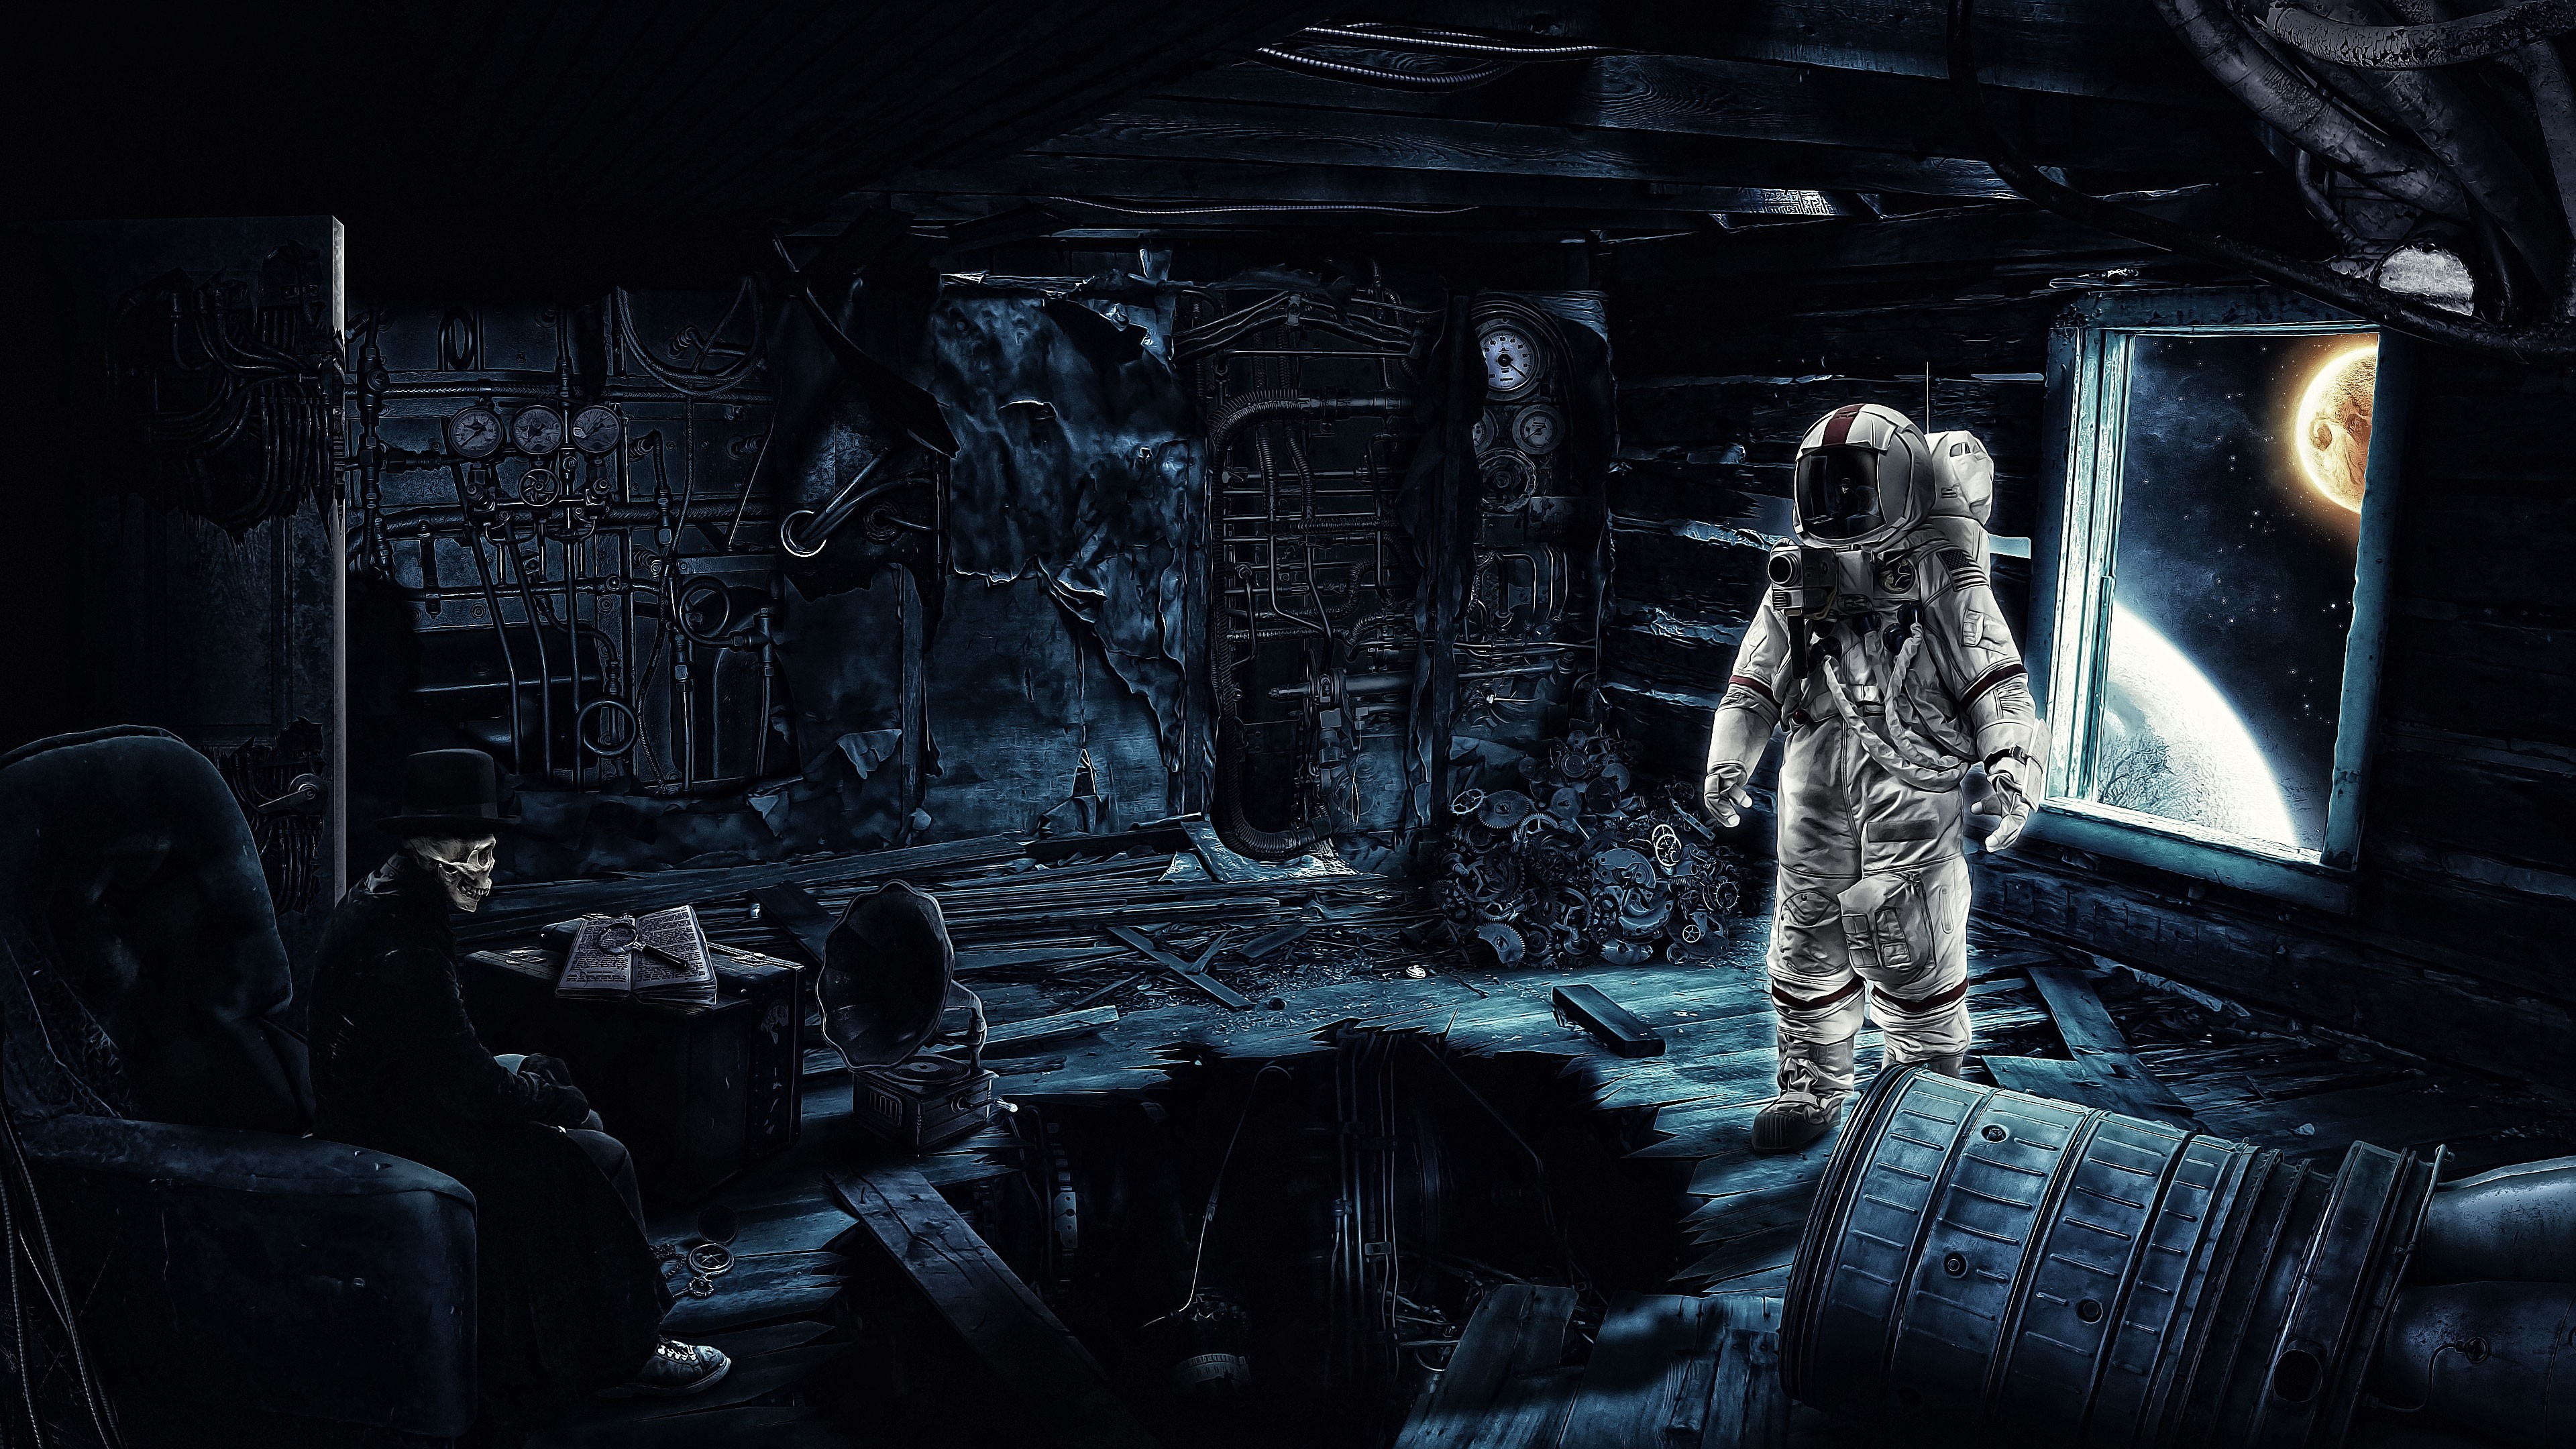 Wallpaper, digital art, planet, space, wooden surface, reflection, hat, futuristic, stars, books, camera, science fiction, gears, astronaut, skull, skeleton, machine, universe, time travel, pipes, midnight, gramophone, darkness, screenshot, computer